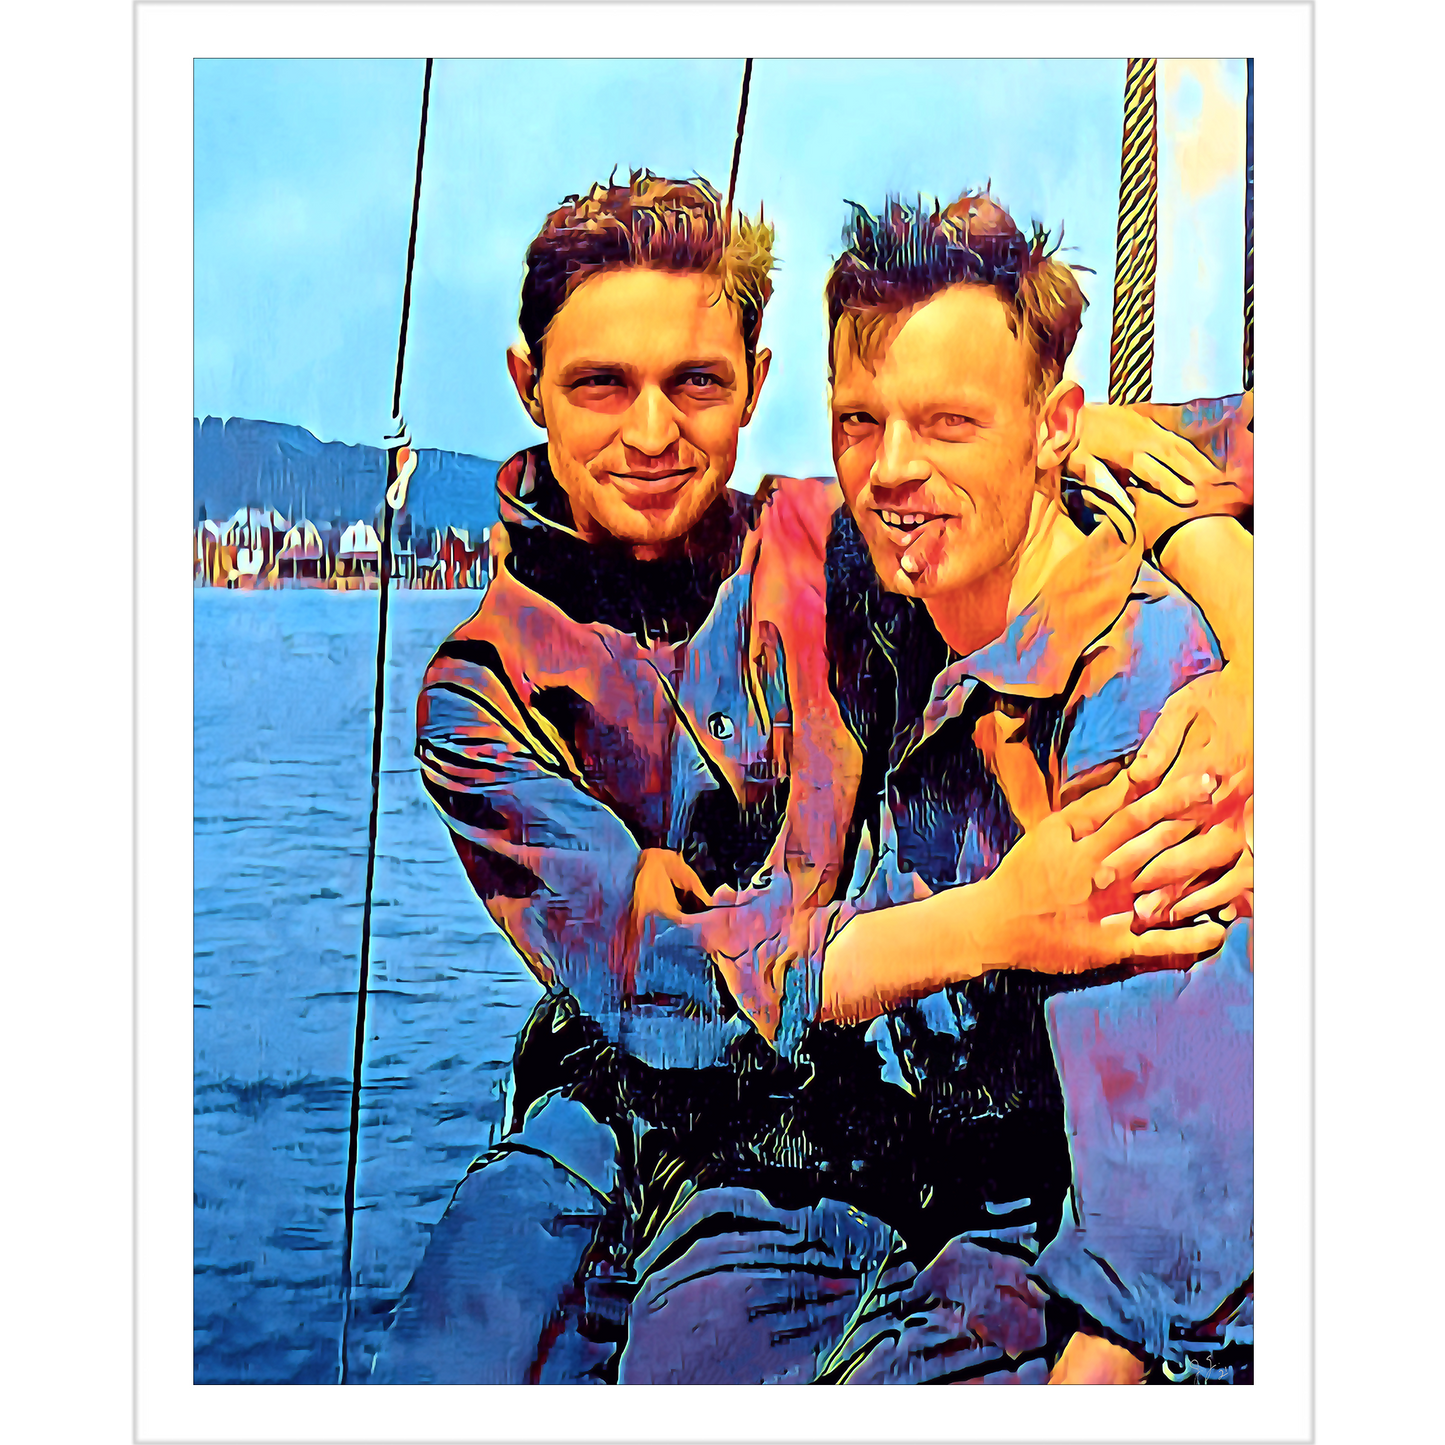 paire 021 | Giclee Artist Print Vintage Affectionate Men Queer Gay LGBTQ Ship Maine Sailor